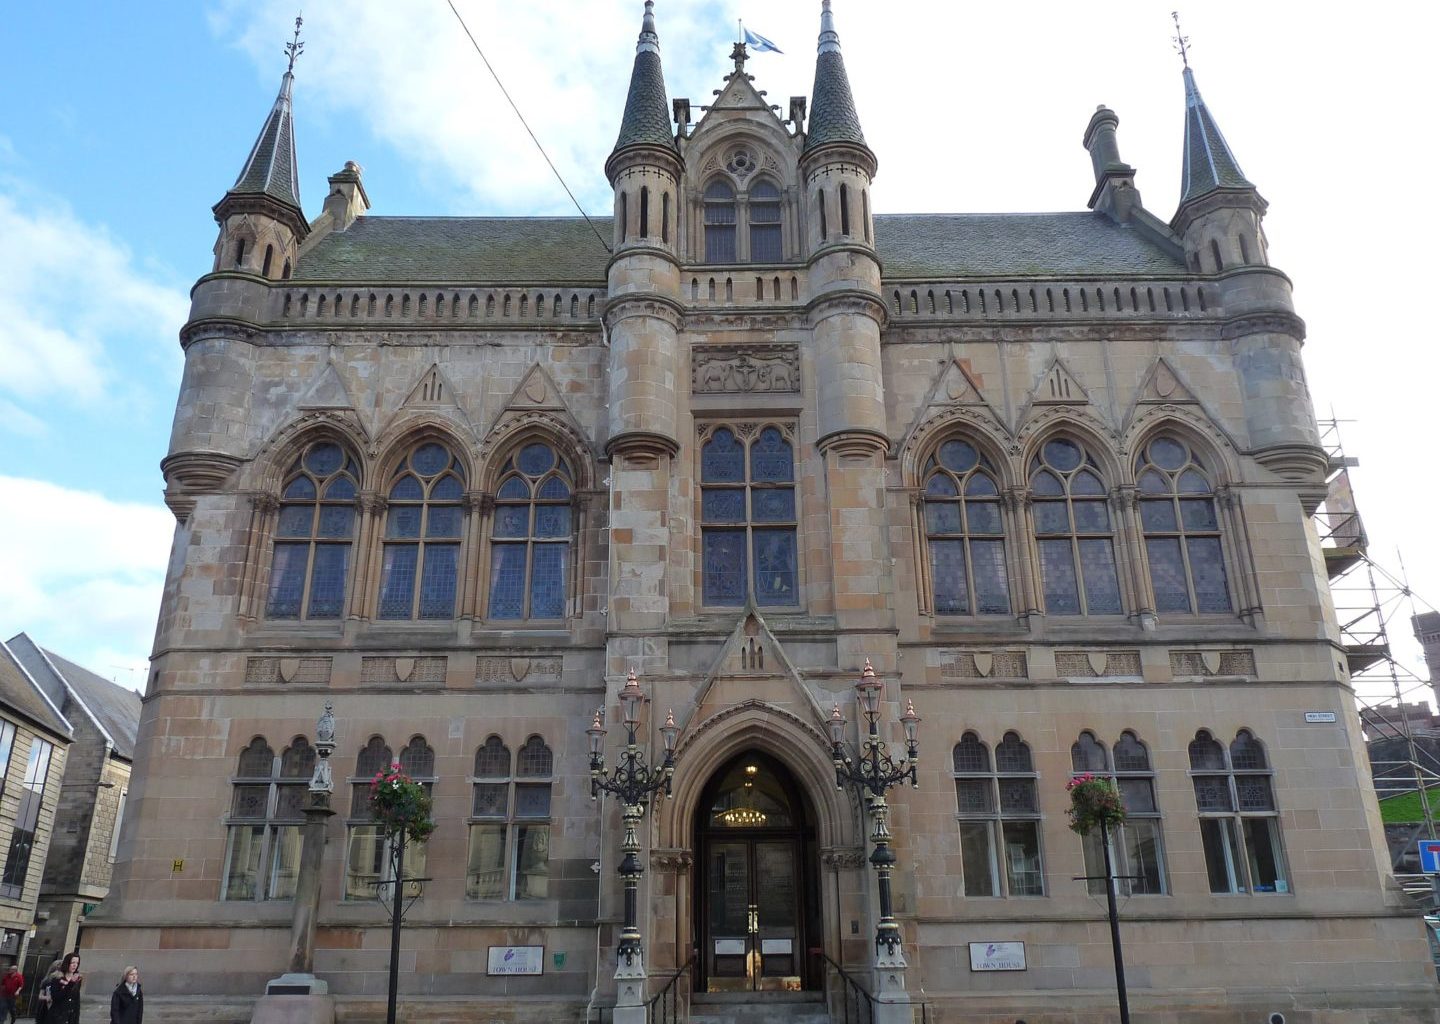 Inverness Town House was rennovated with common good funds